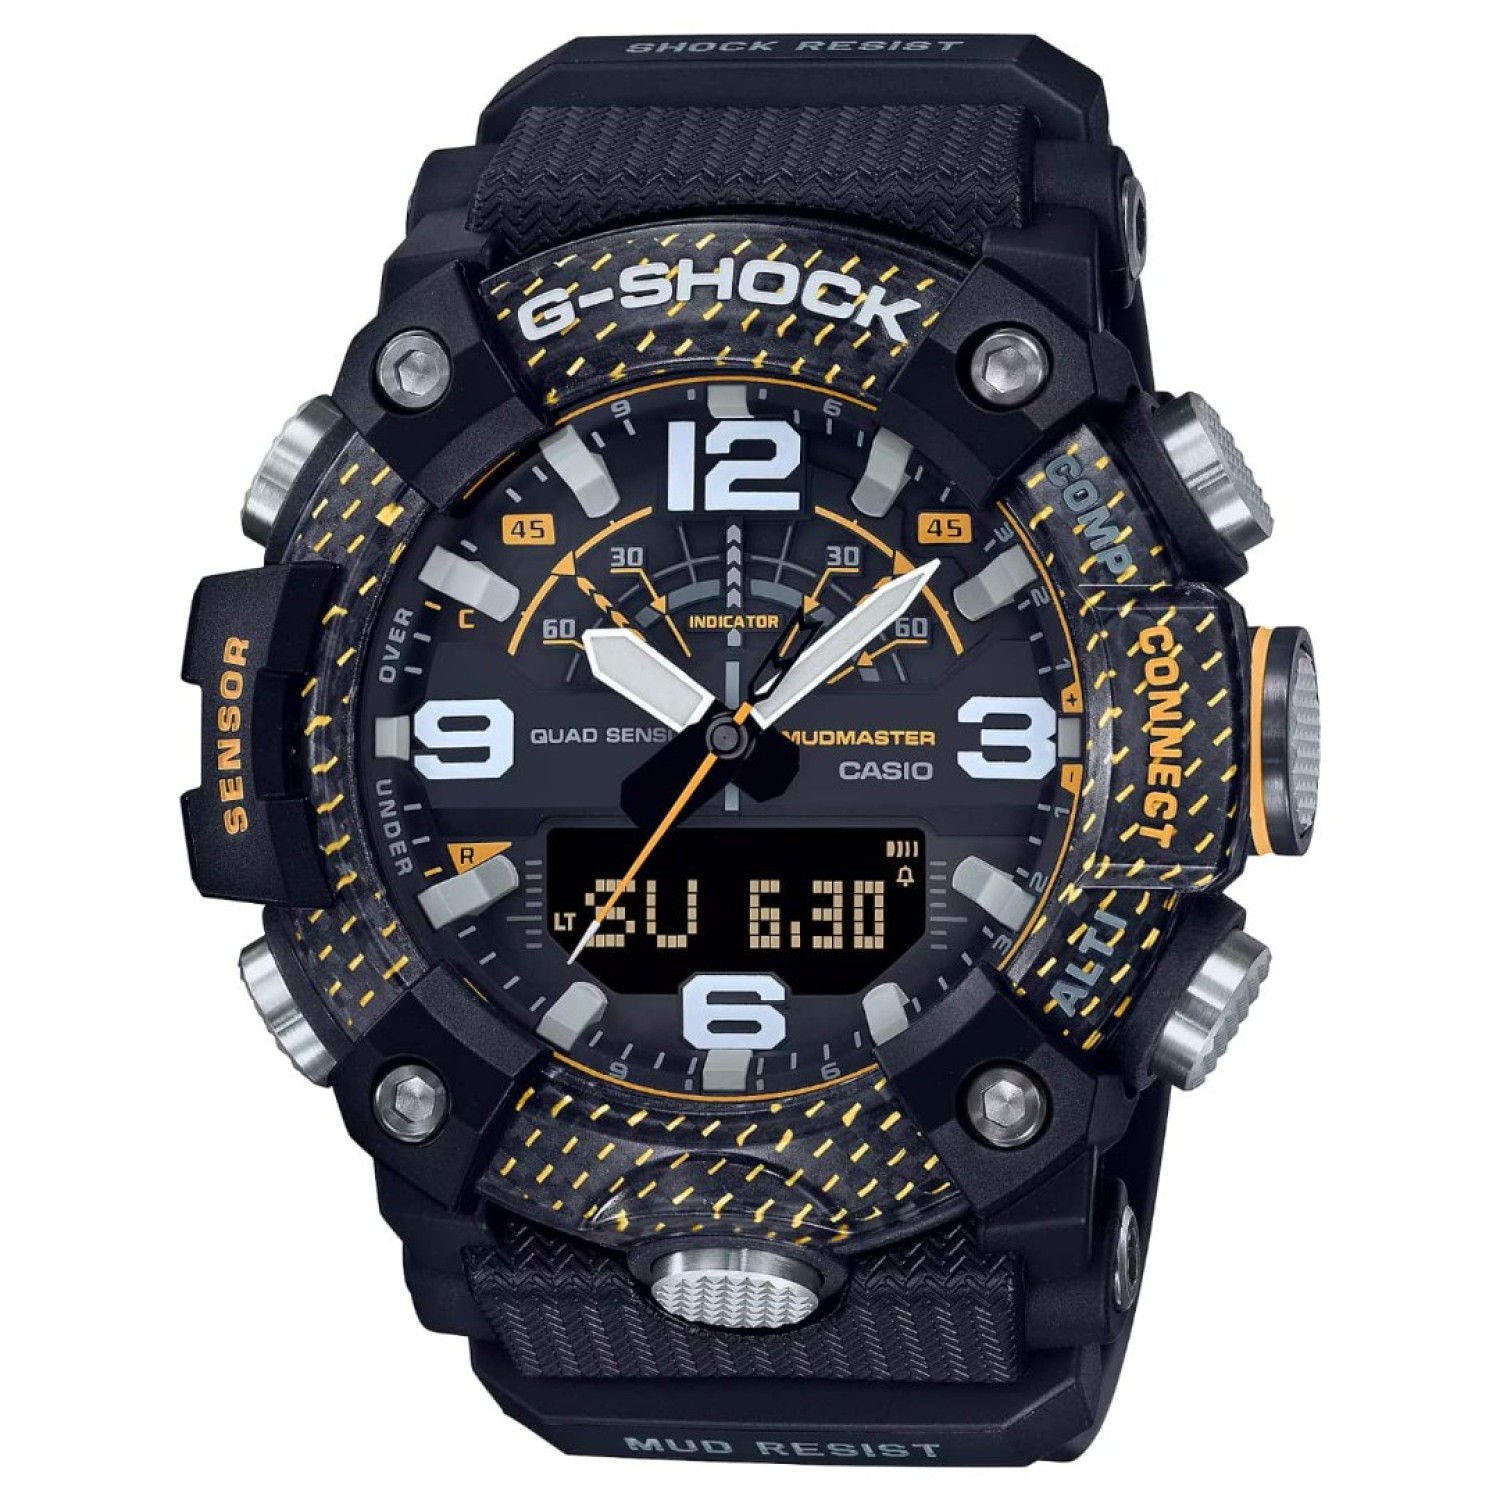 GGB100Y-1A Casio G-Shock MASTER of G Mudmaster. The GGB100 MUDMASTER employs high rigidity carbon in the case to keep damage and warping at bay and ensure extreme airtightness and shock resistance.